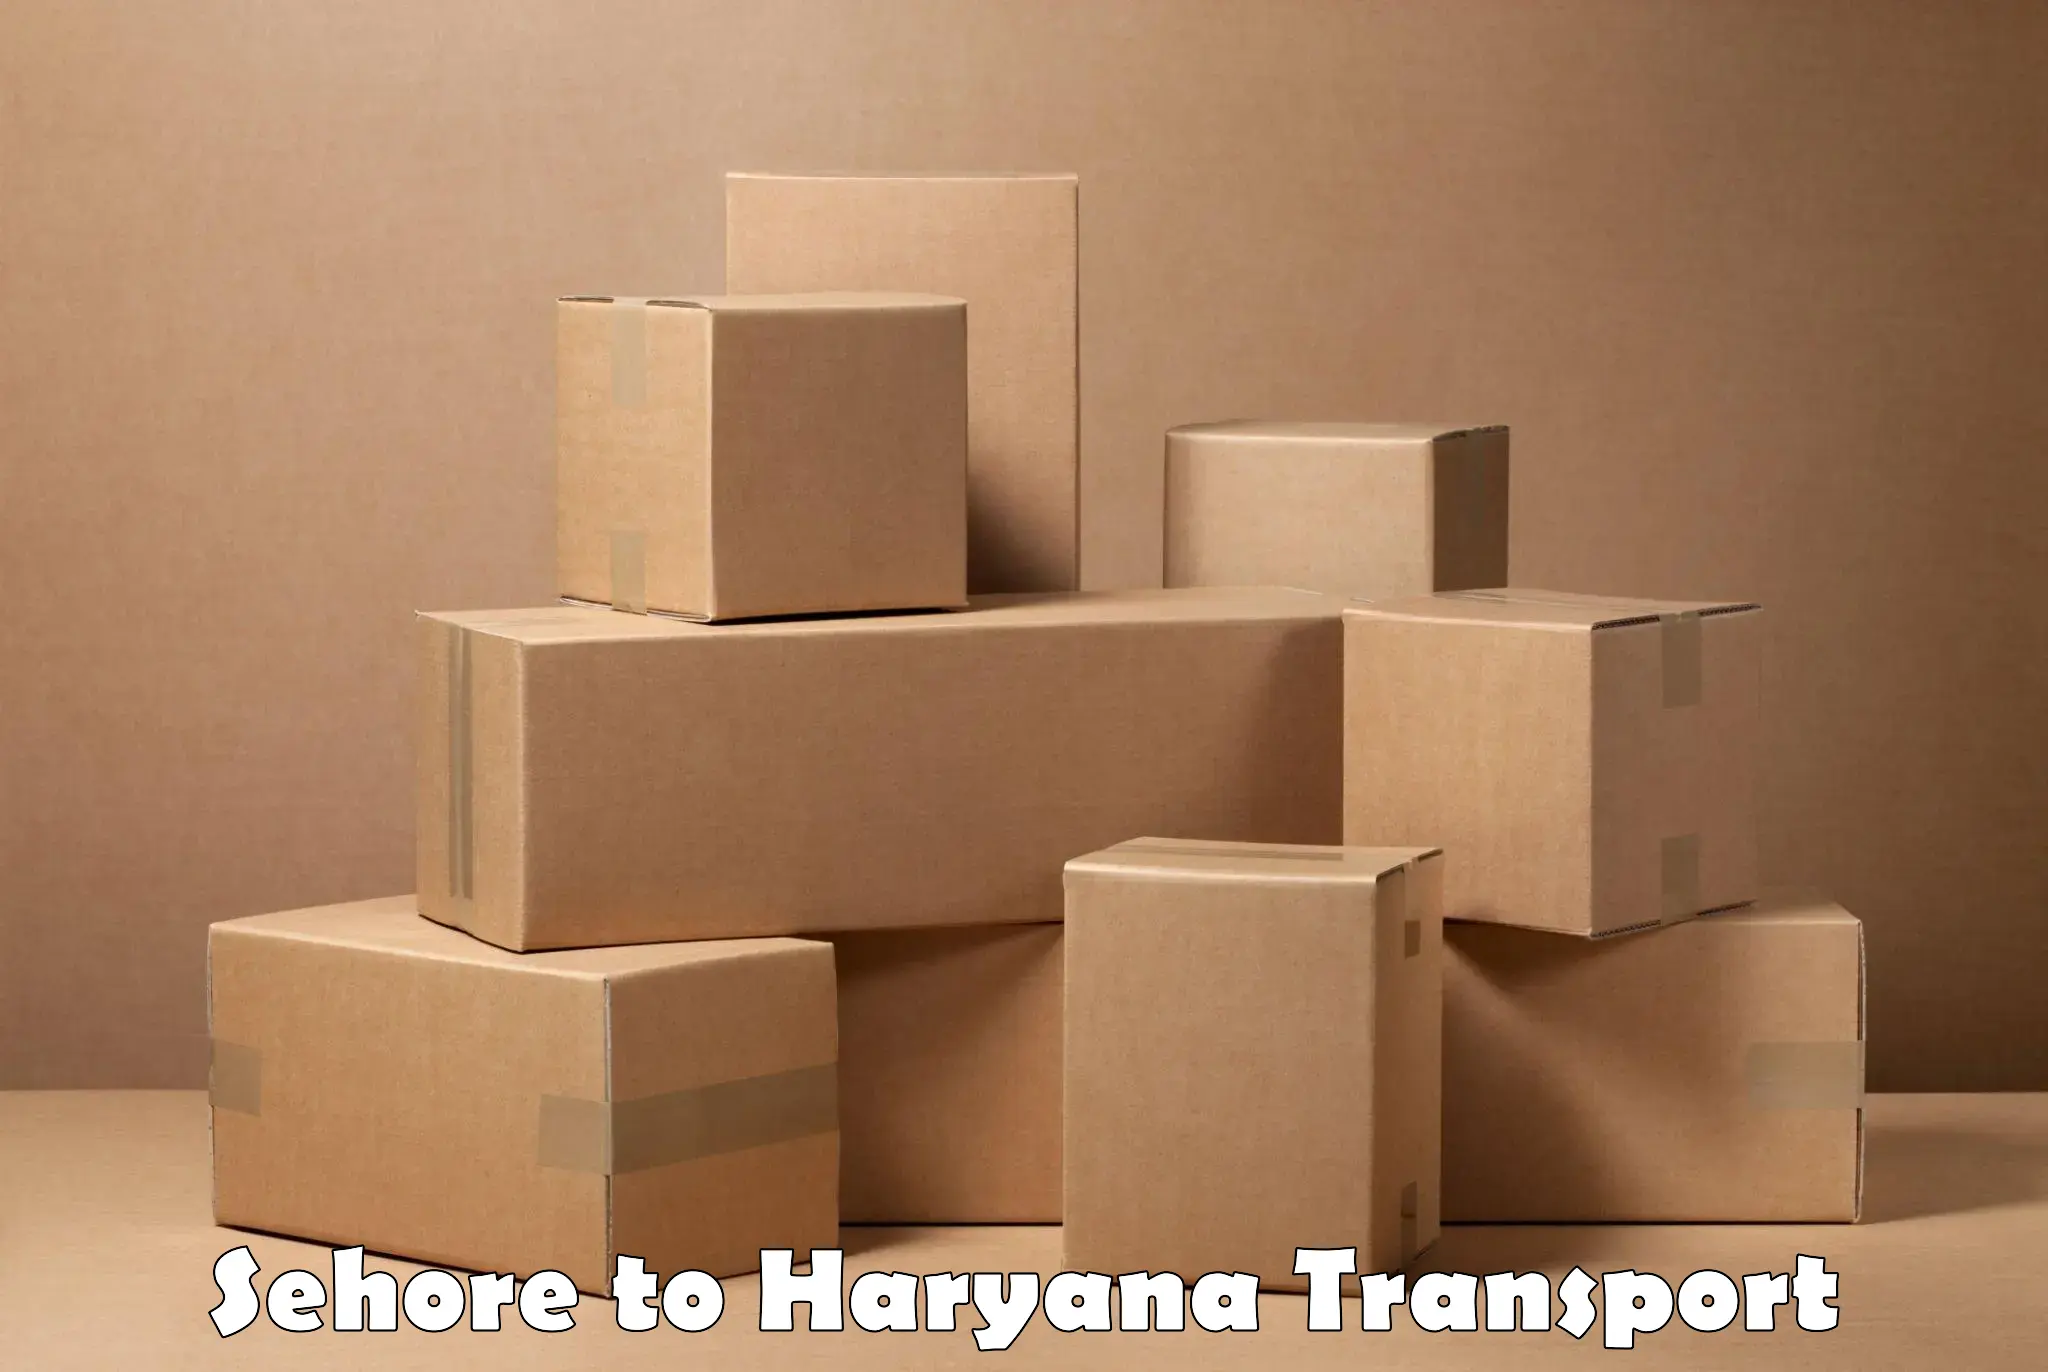 Commercial transport service Sehore to Panchkula